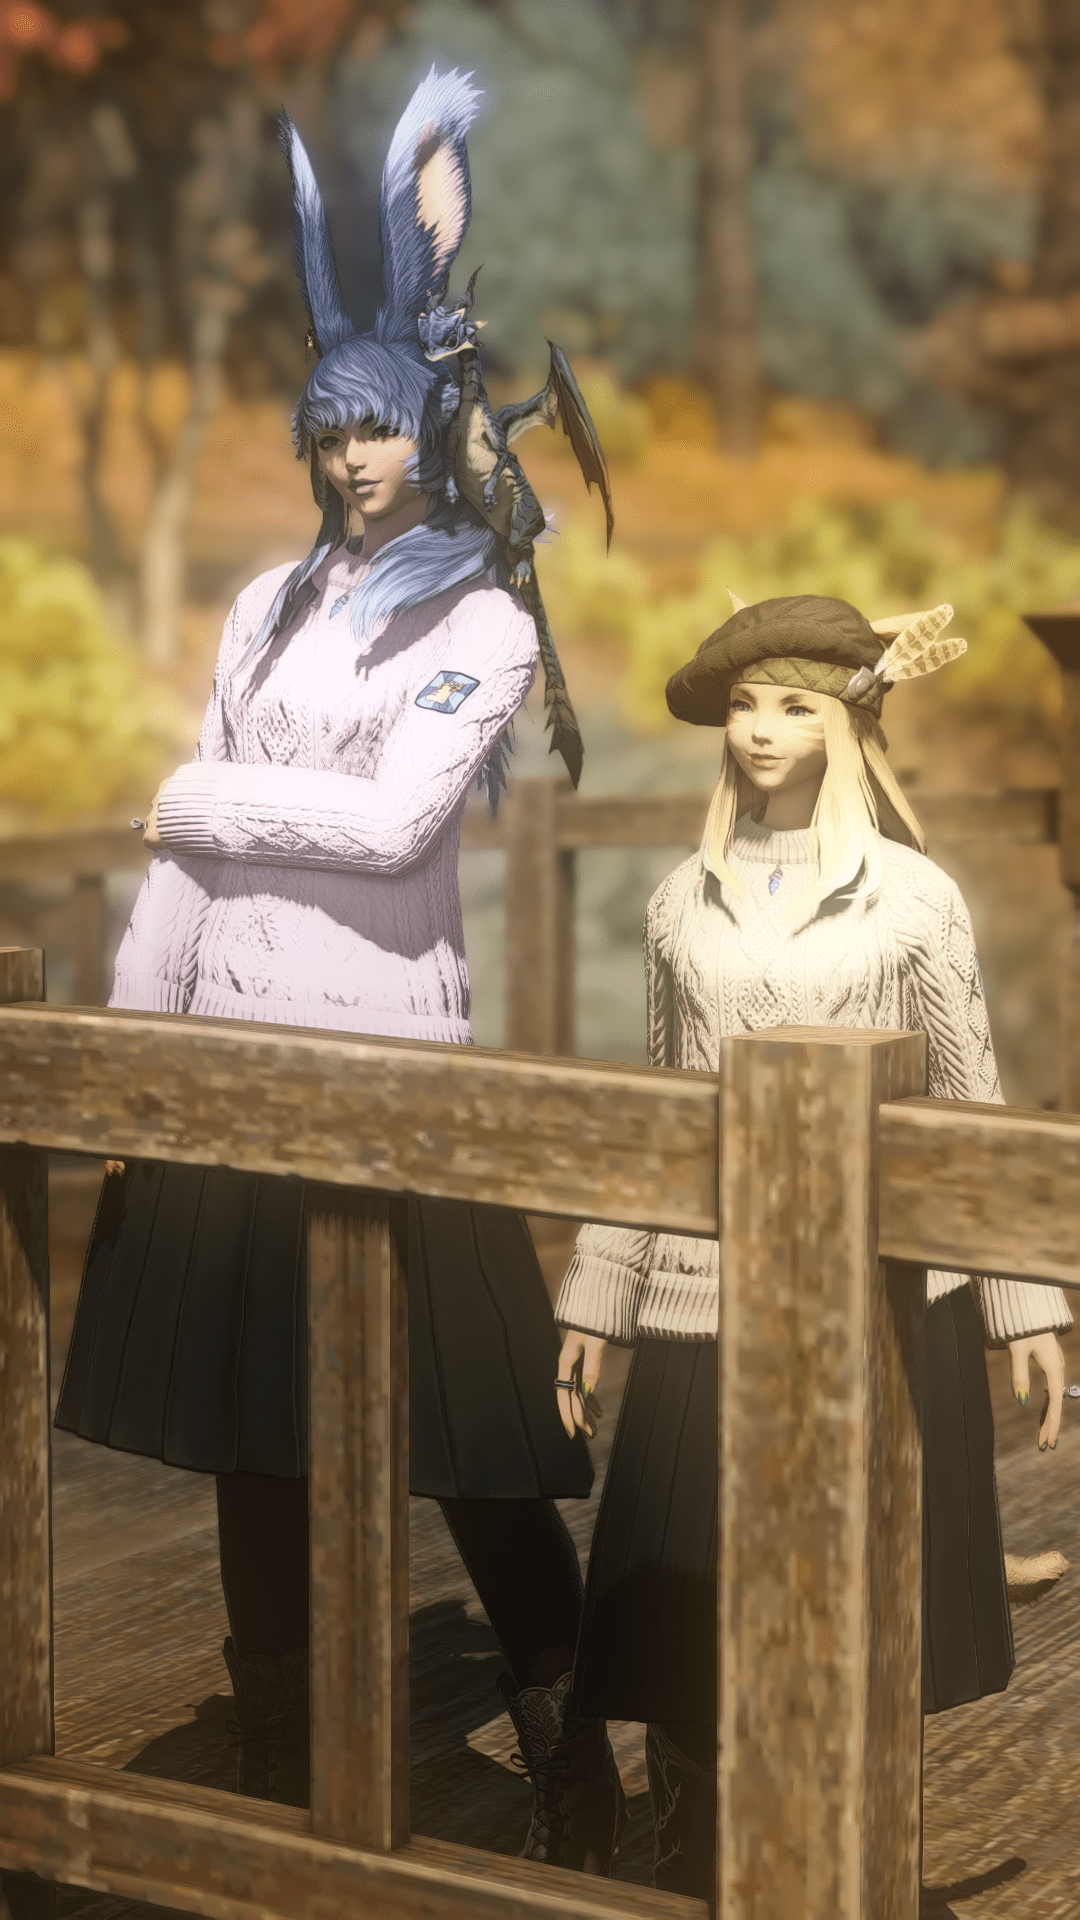 Aikirees and I on a wooden bridge wearing sweaters and long skirts.